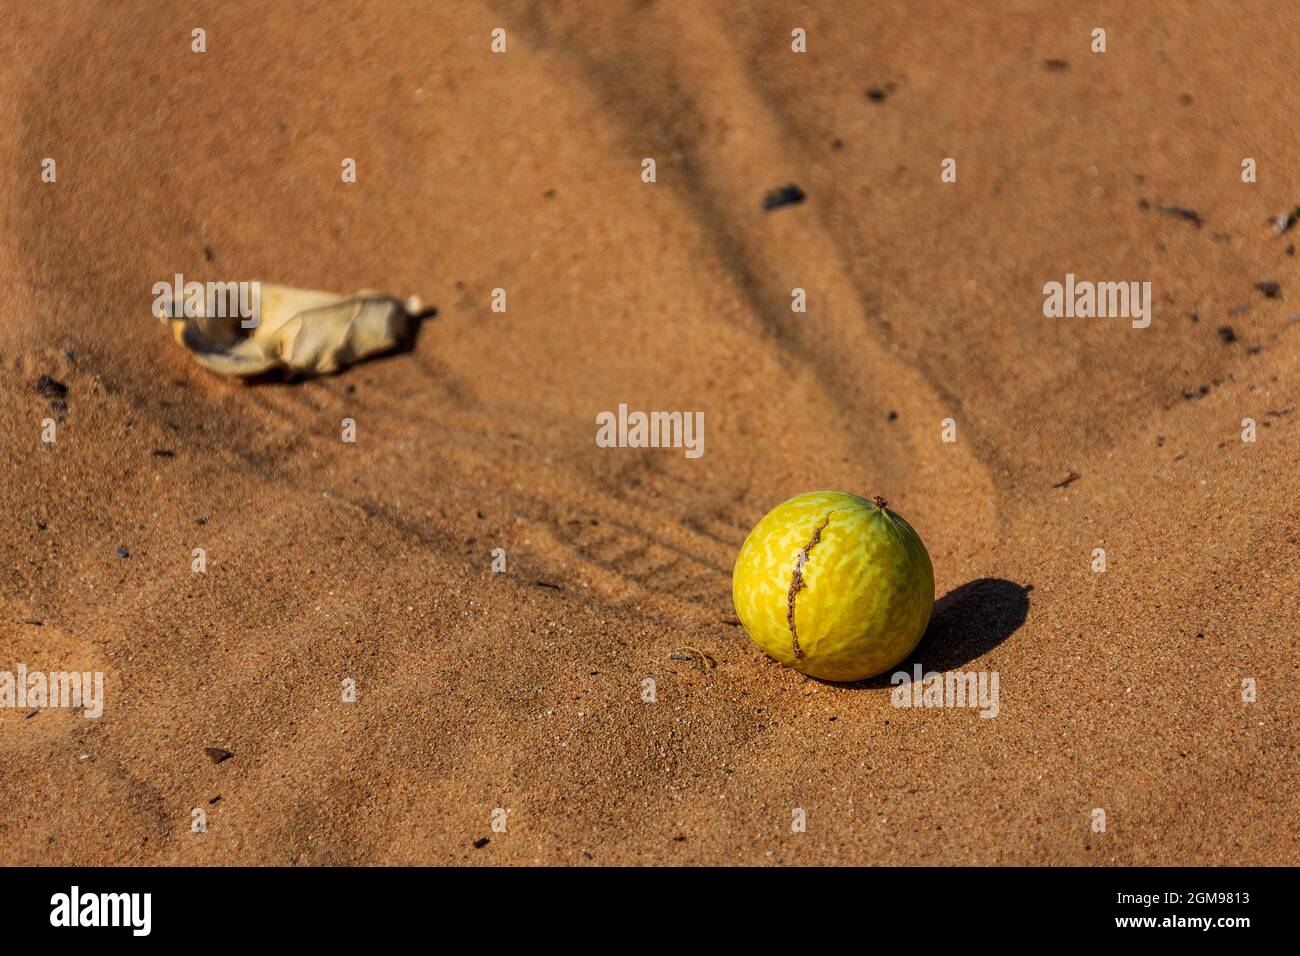 A ripe colocynth (Citrullus colocynthis) fruit in the Dubai desert Stock Photo